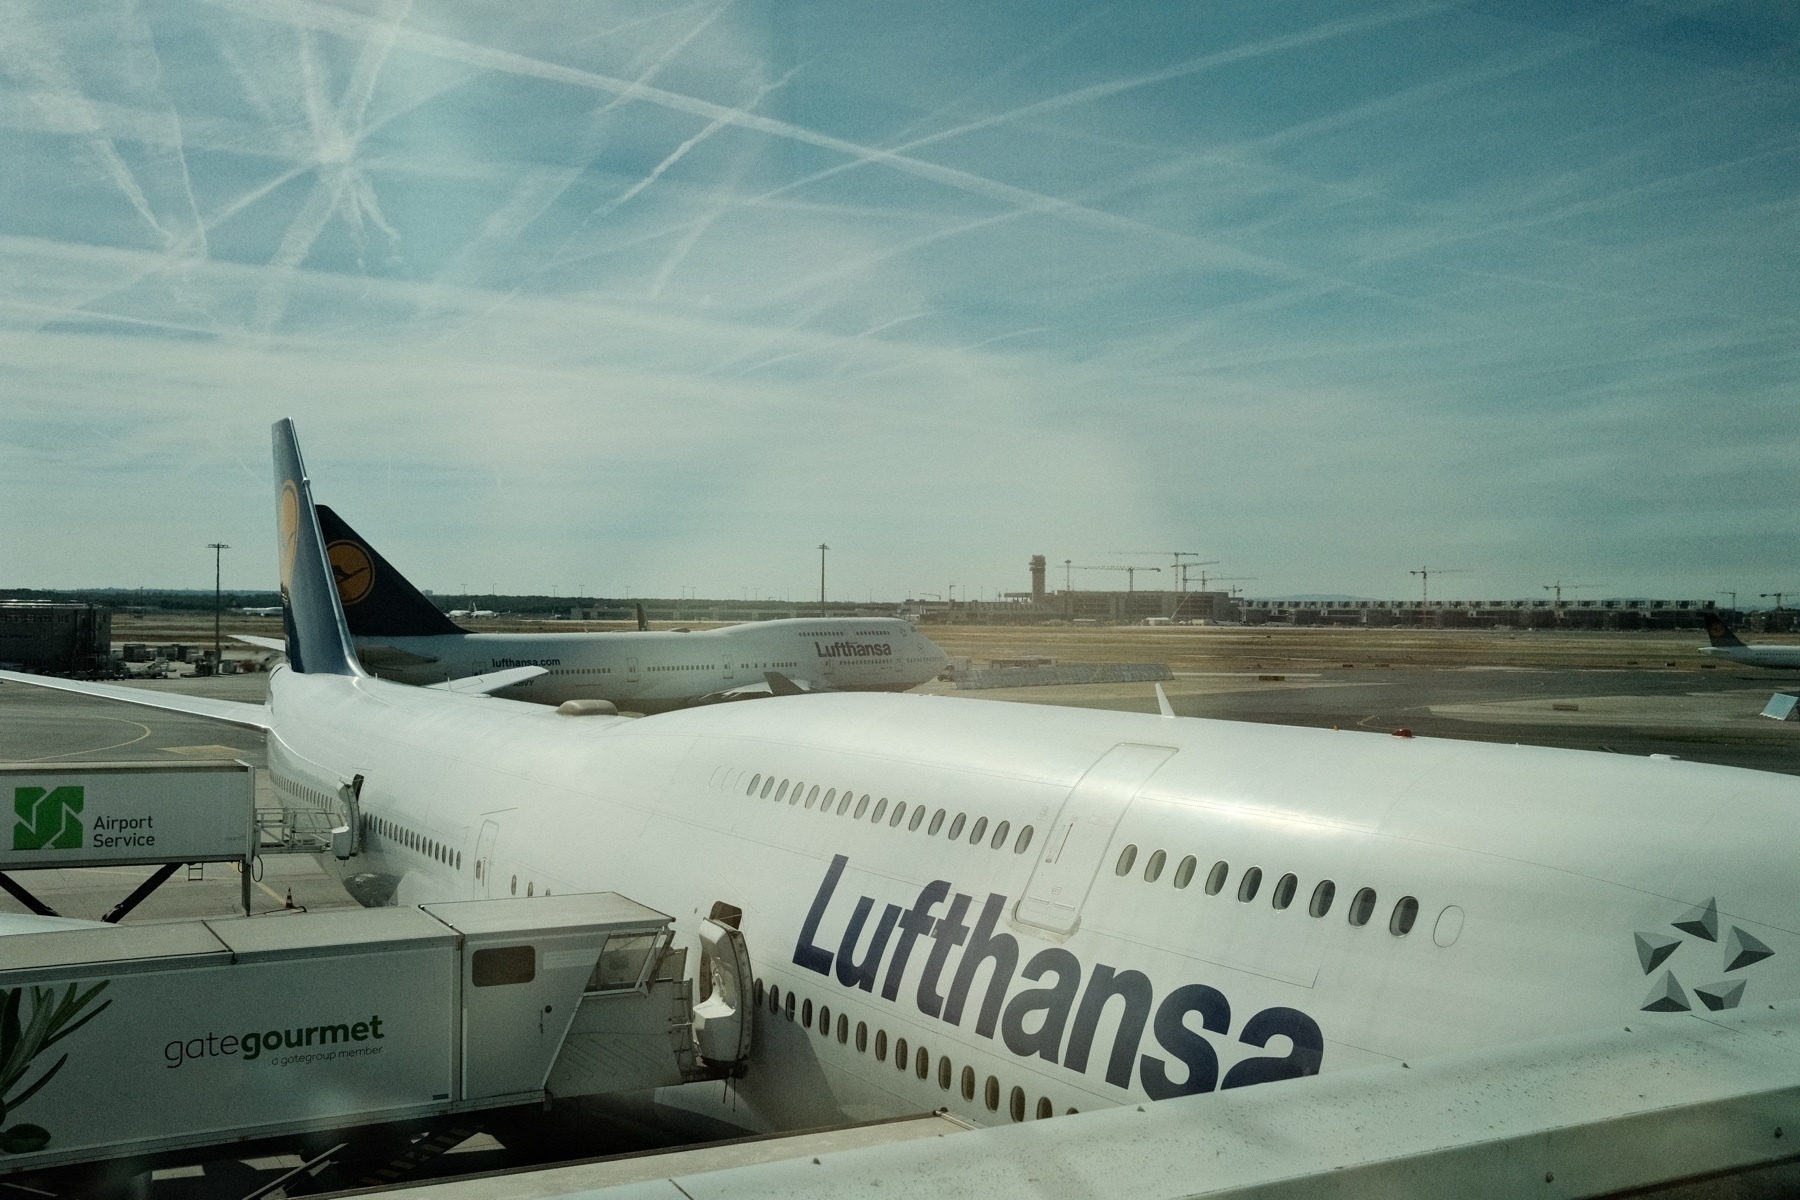 A Lufthansa 747 at the gate and a 747 taxiing behind it. Mulitudes of intersecting contrails mark up the hazy blue sky